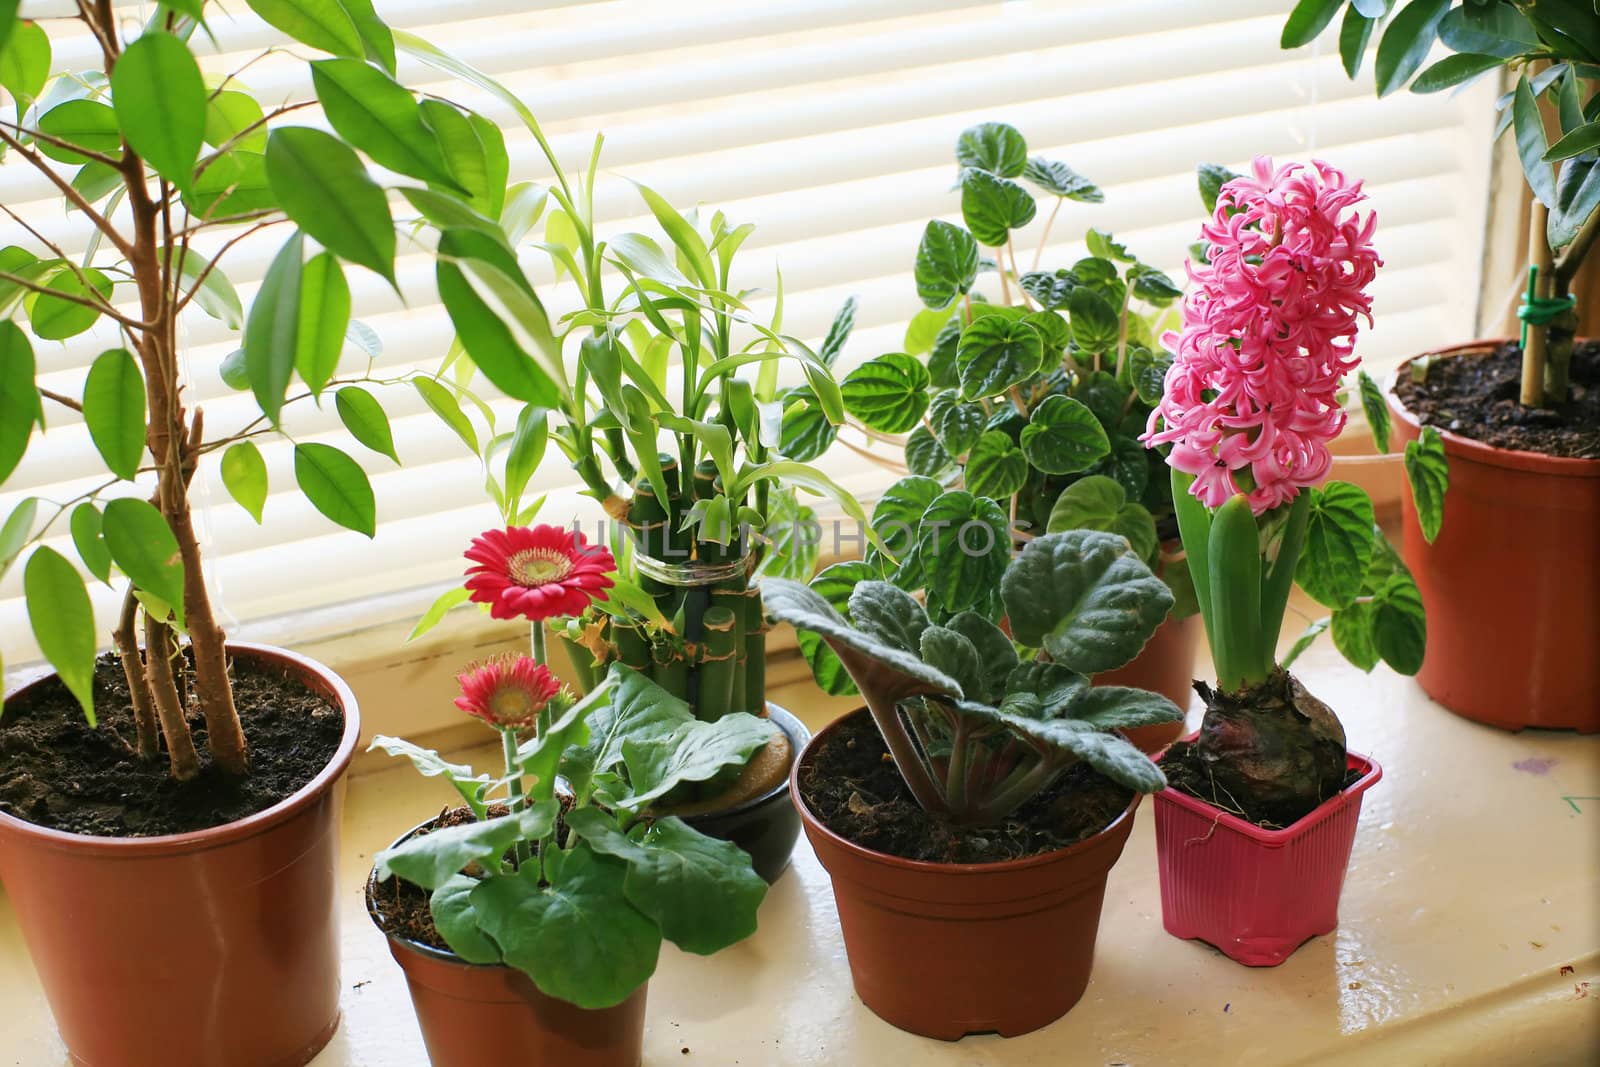 An image of green plants on the sill